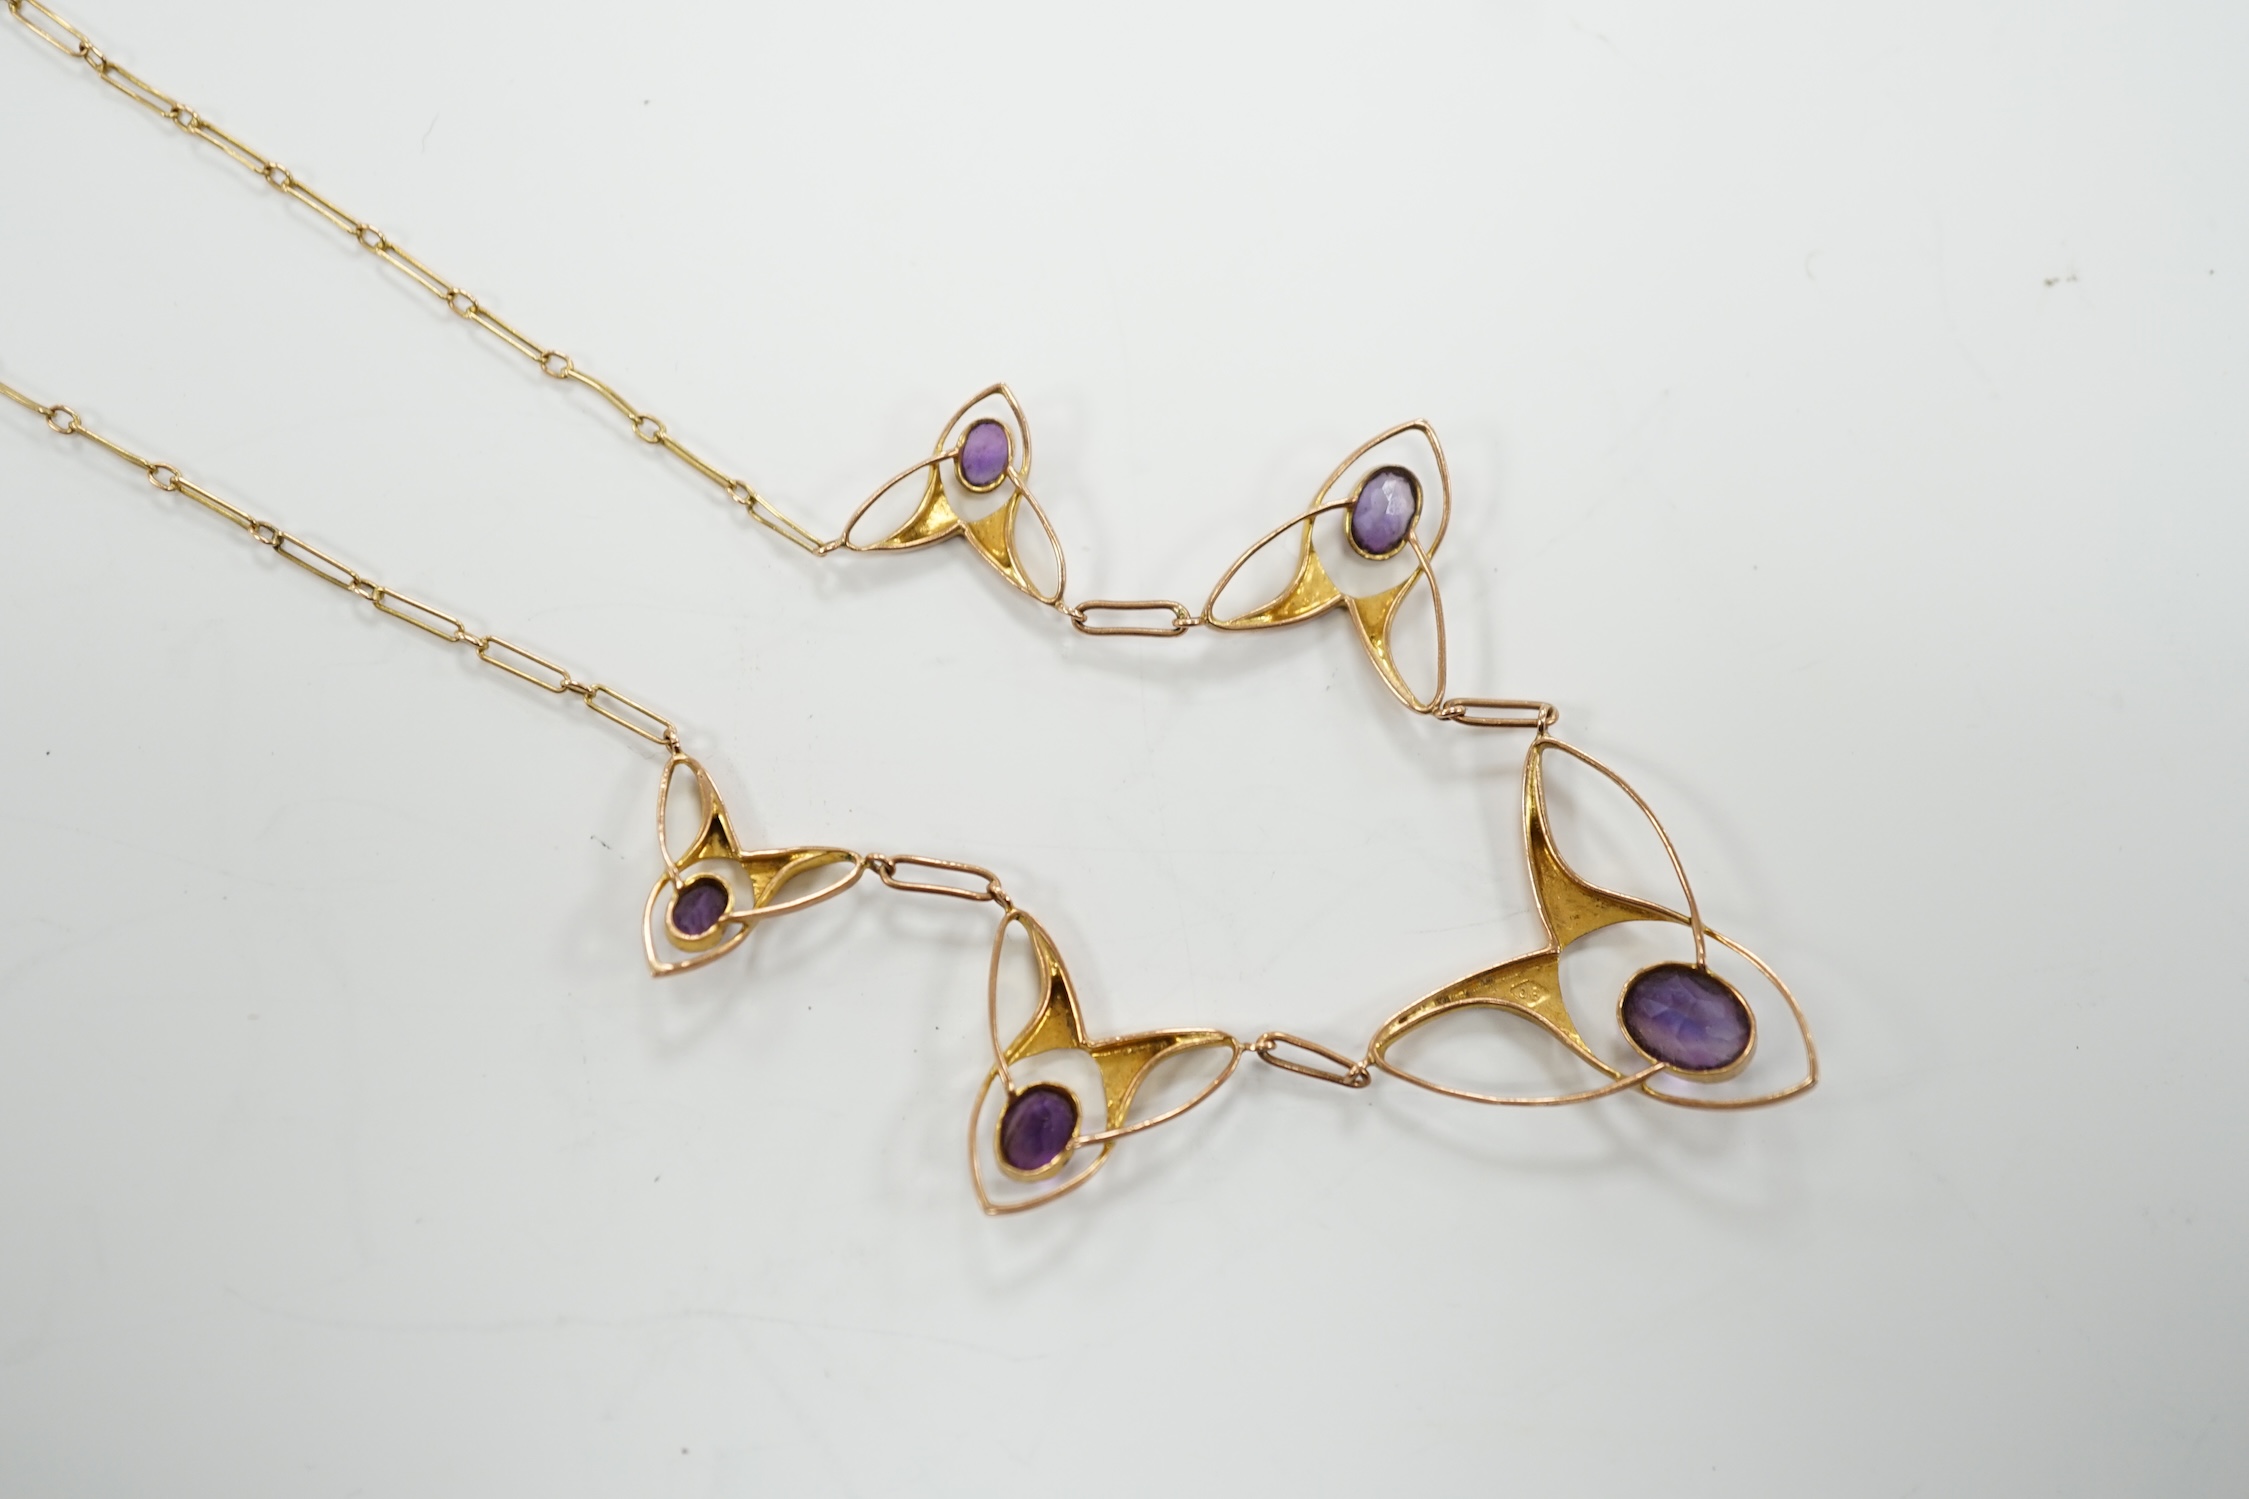 An Edwardian Art Nouveau 9ct and graduated five stone oval cut amethyst set necklace, 44cm, gross weight 6.2 grams.